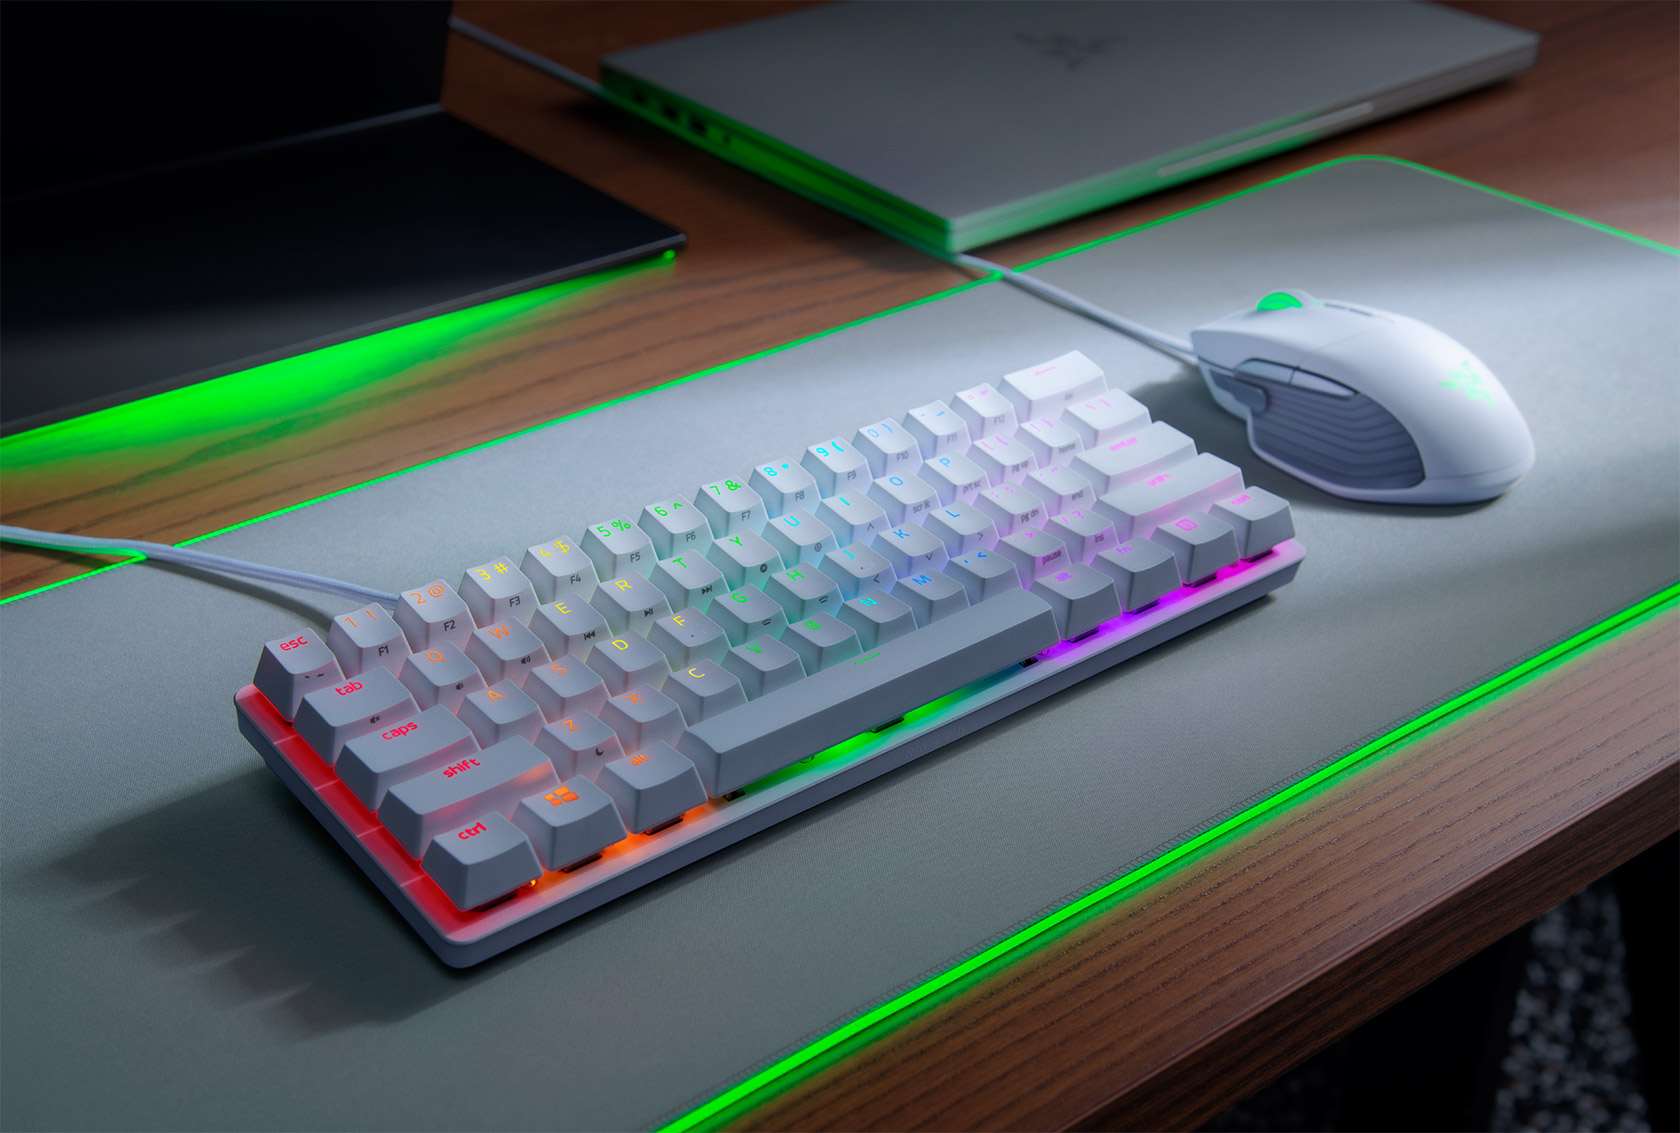 Read more about the article Razer Huntsman Mini Gaming Keyboard